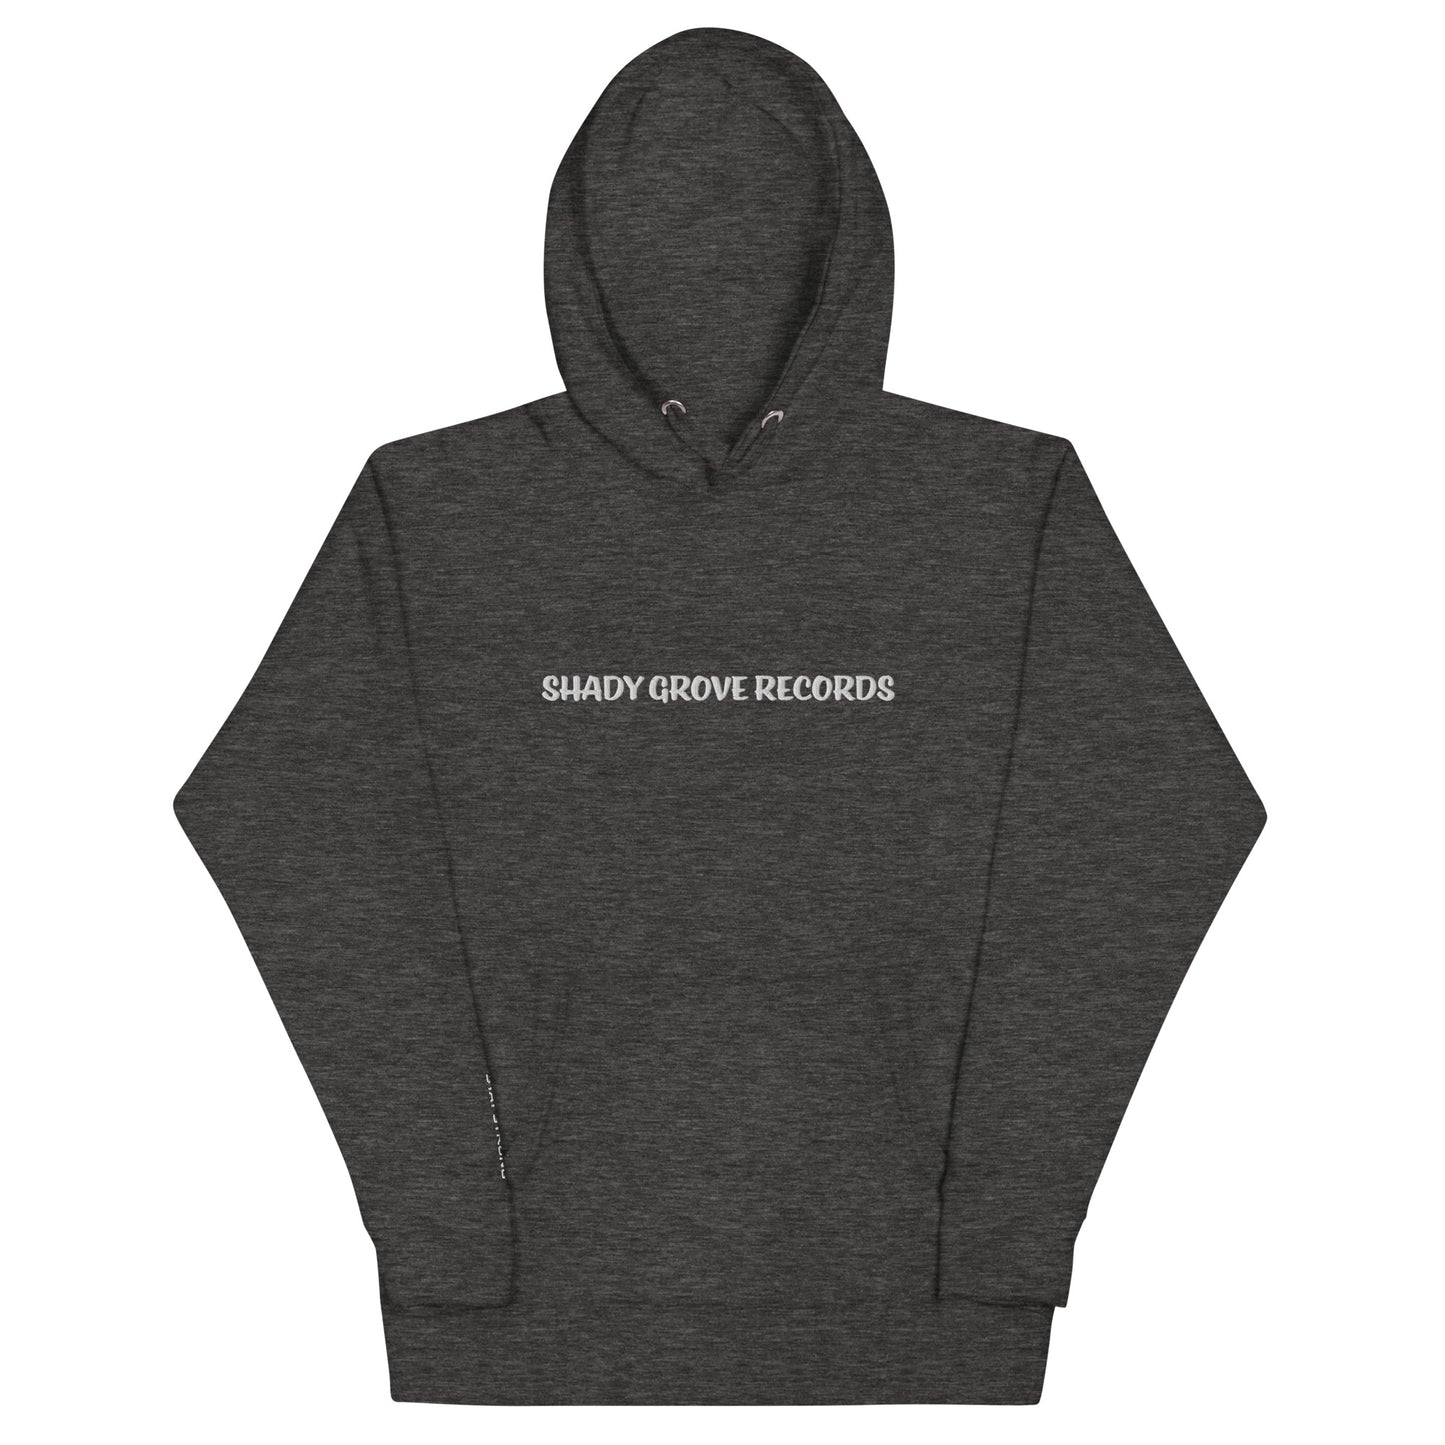 Unisex "Stay Strong" Hoodie